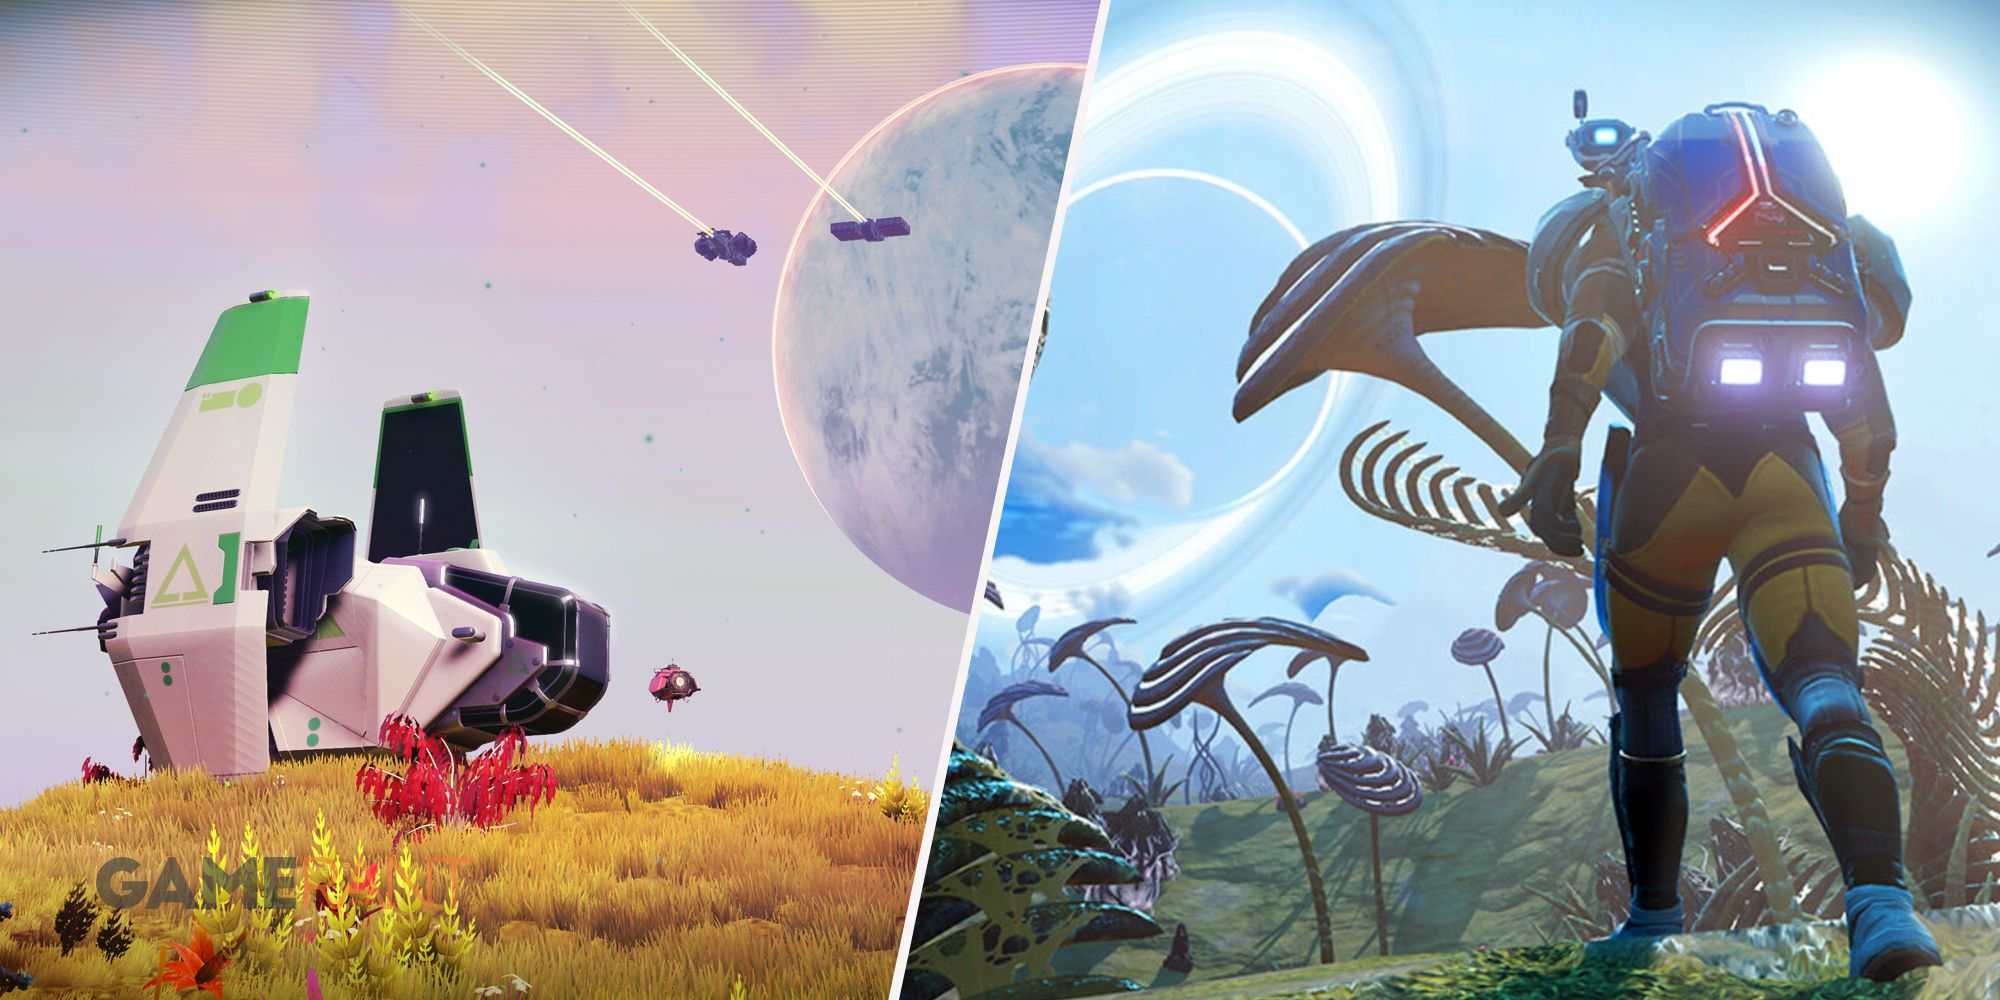 No Man's Sky ship with planet in background on left, No Man's Sky character exploring a new planet on right